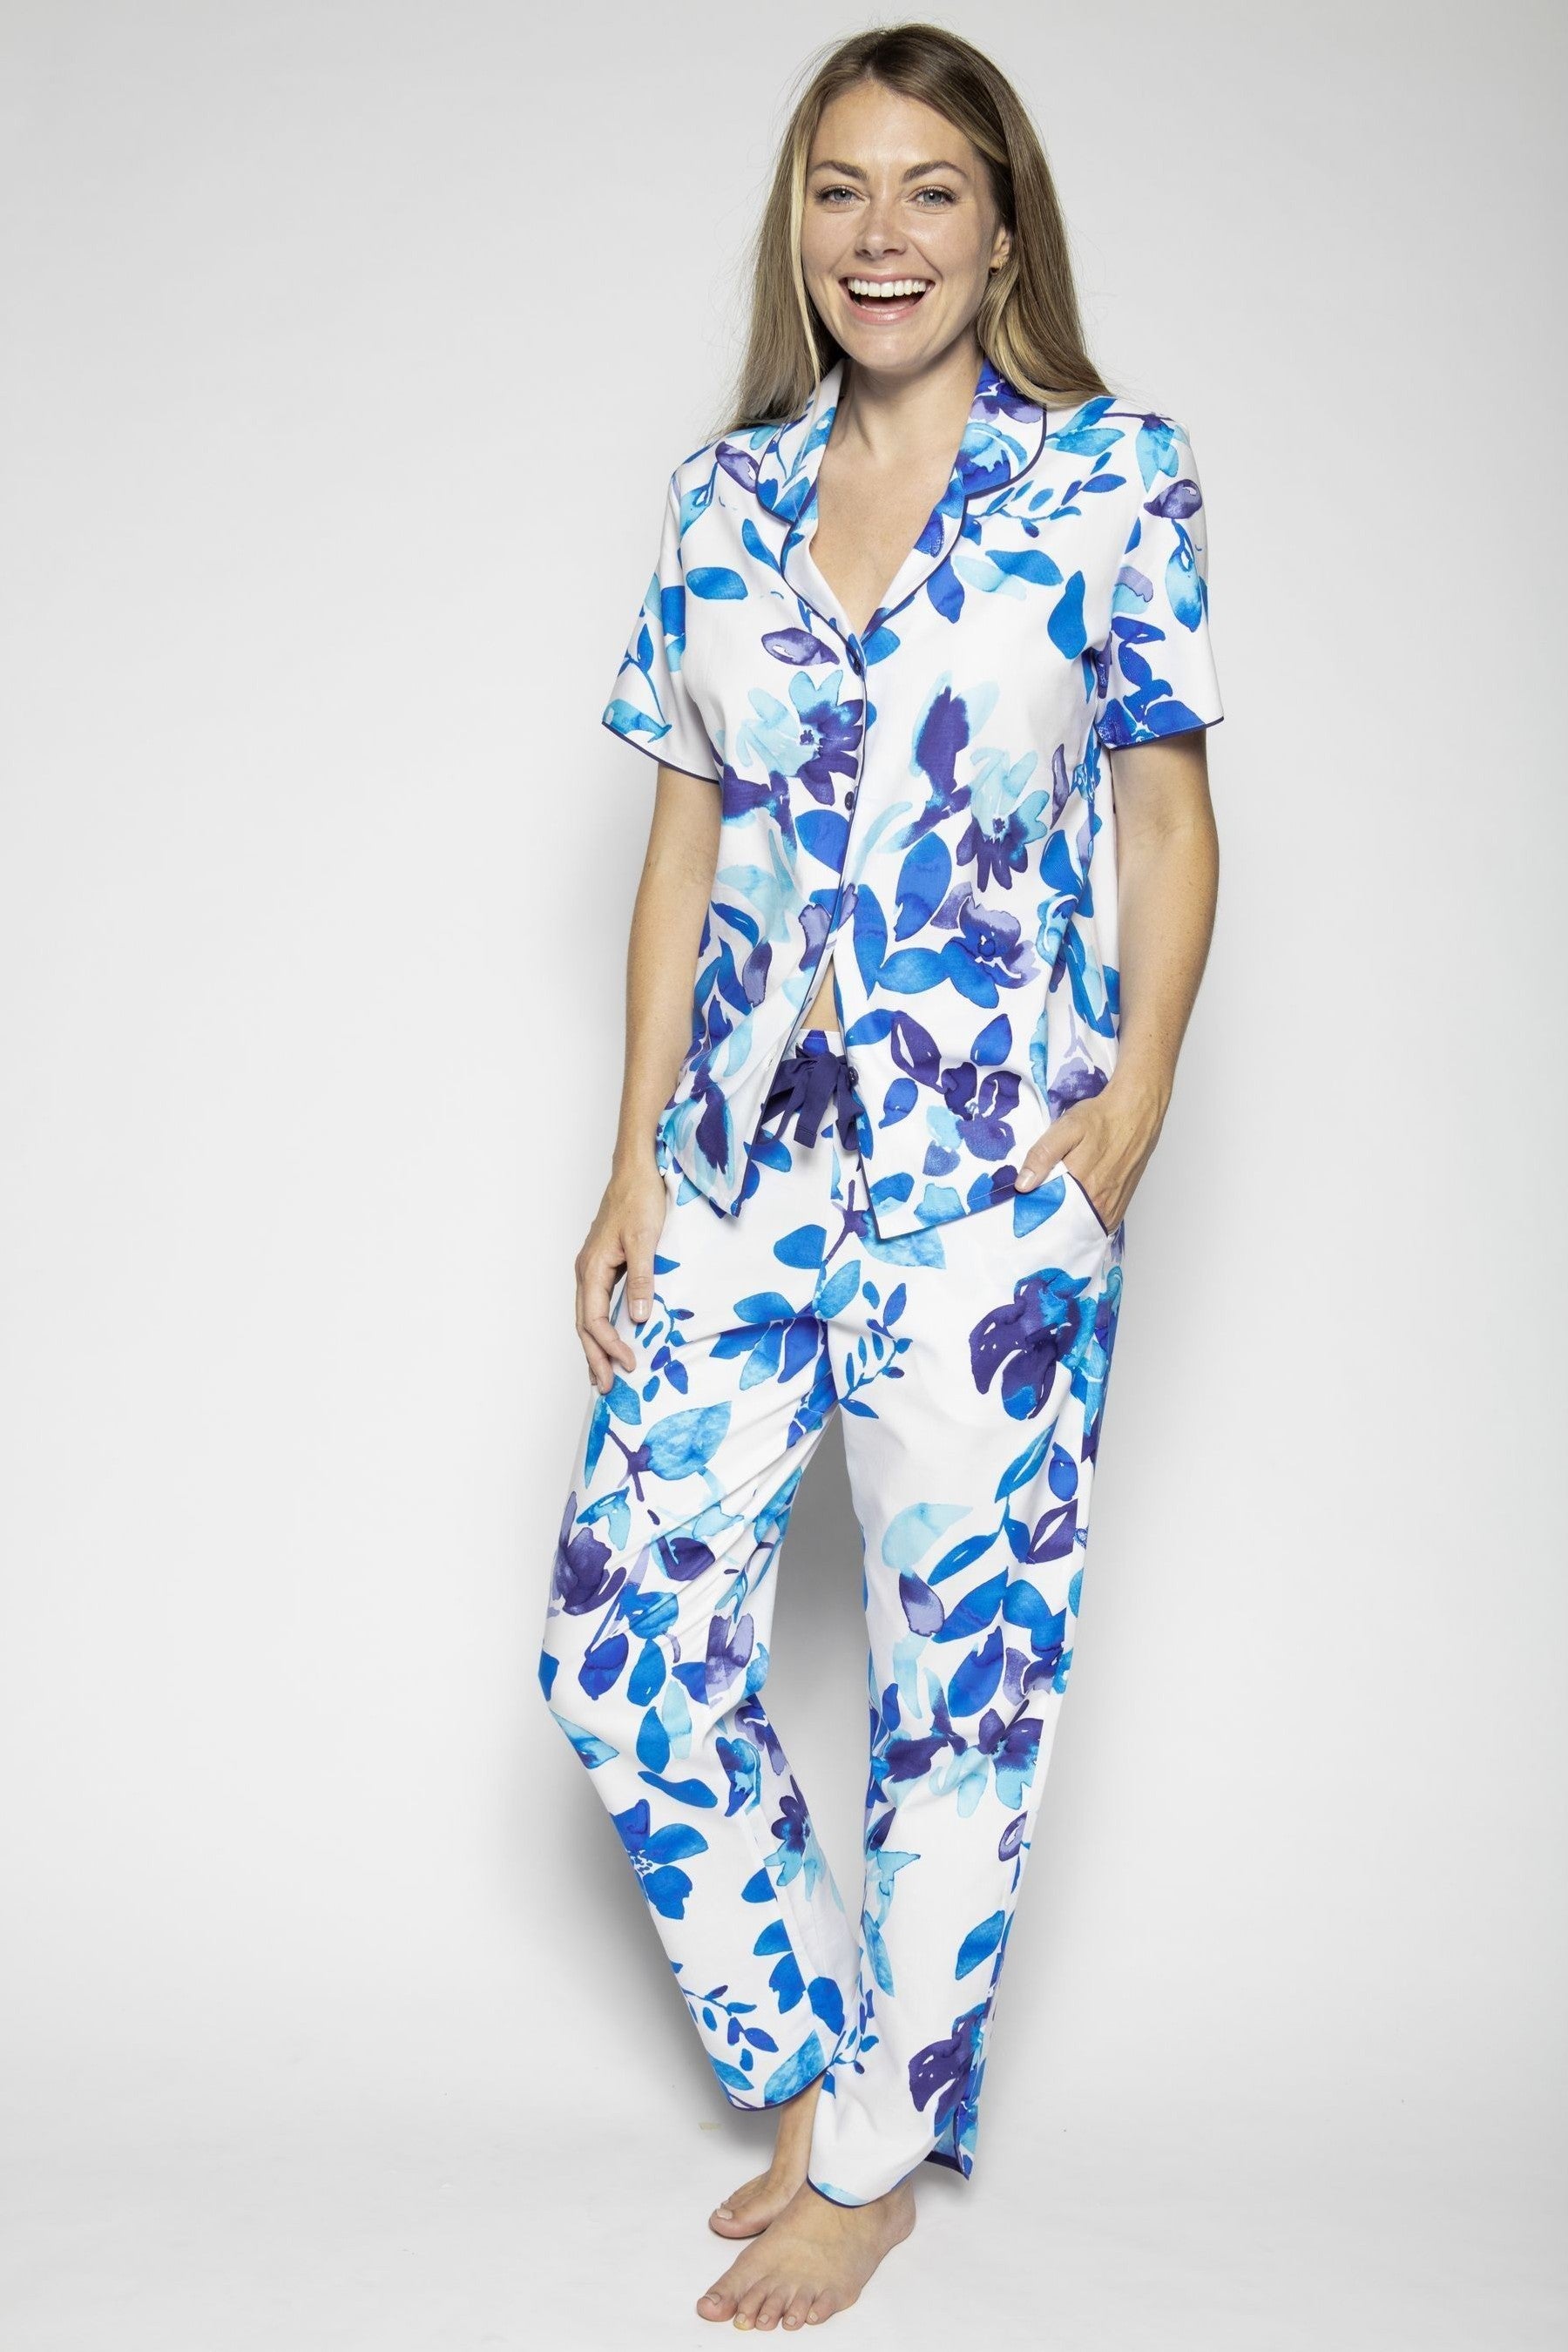 Blue Color Digital Abstract Printed loungewear/Nightsuit For Women With Pants.